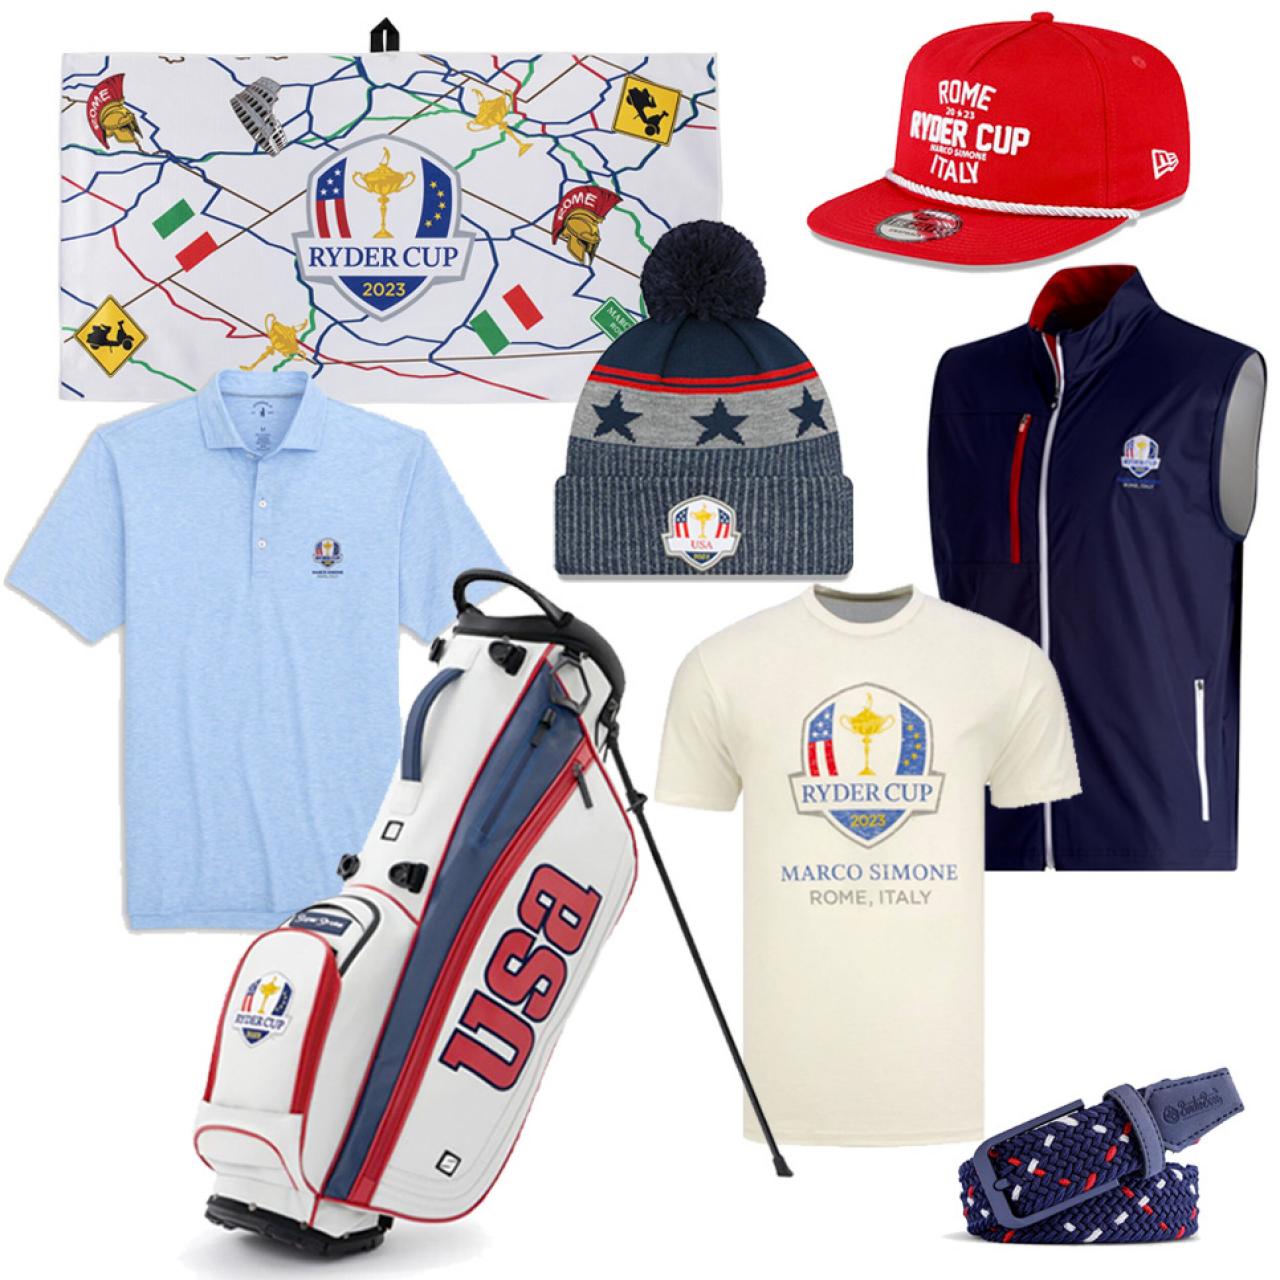 https://golfdigest.sports.sndimg.com/content/dam/images/golfdigest/products/2023/9/13/20230913-Ryder-Cup-Product-Promo.jpg.rend.hgtvcom.1280.1280.suffix/1694614772949.jpeg